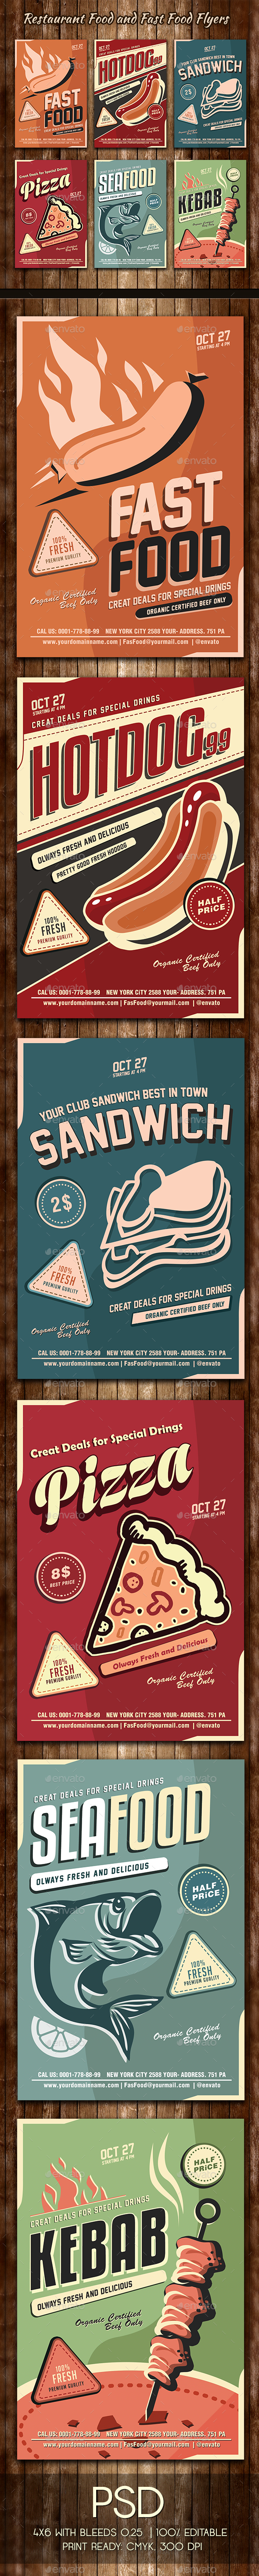 Restaurant Food and Fast Food Flyers by colorfuldesign | GraphicRiver